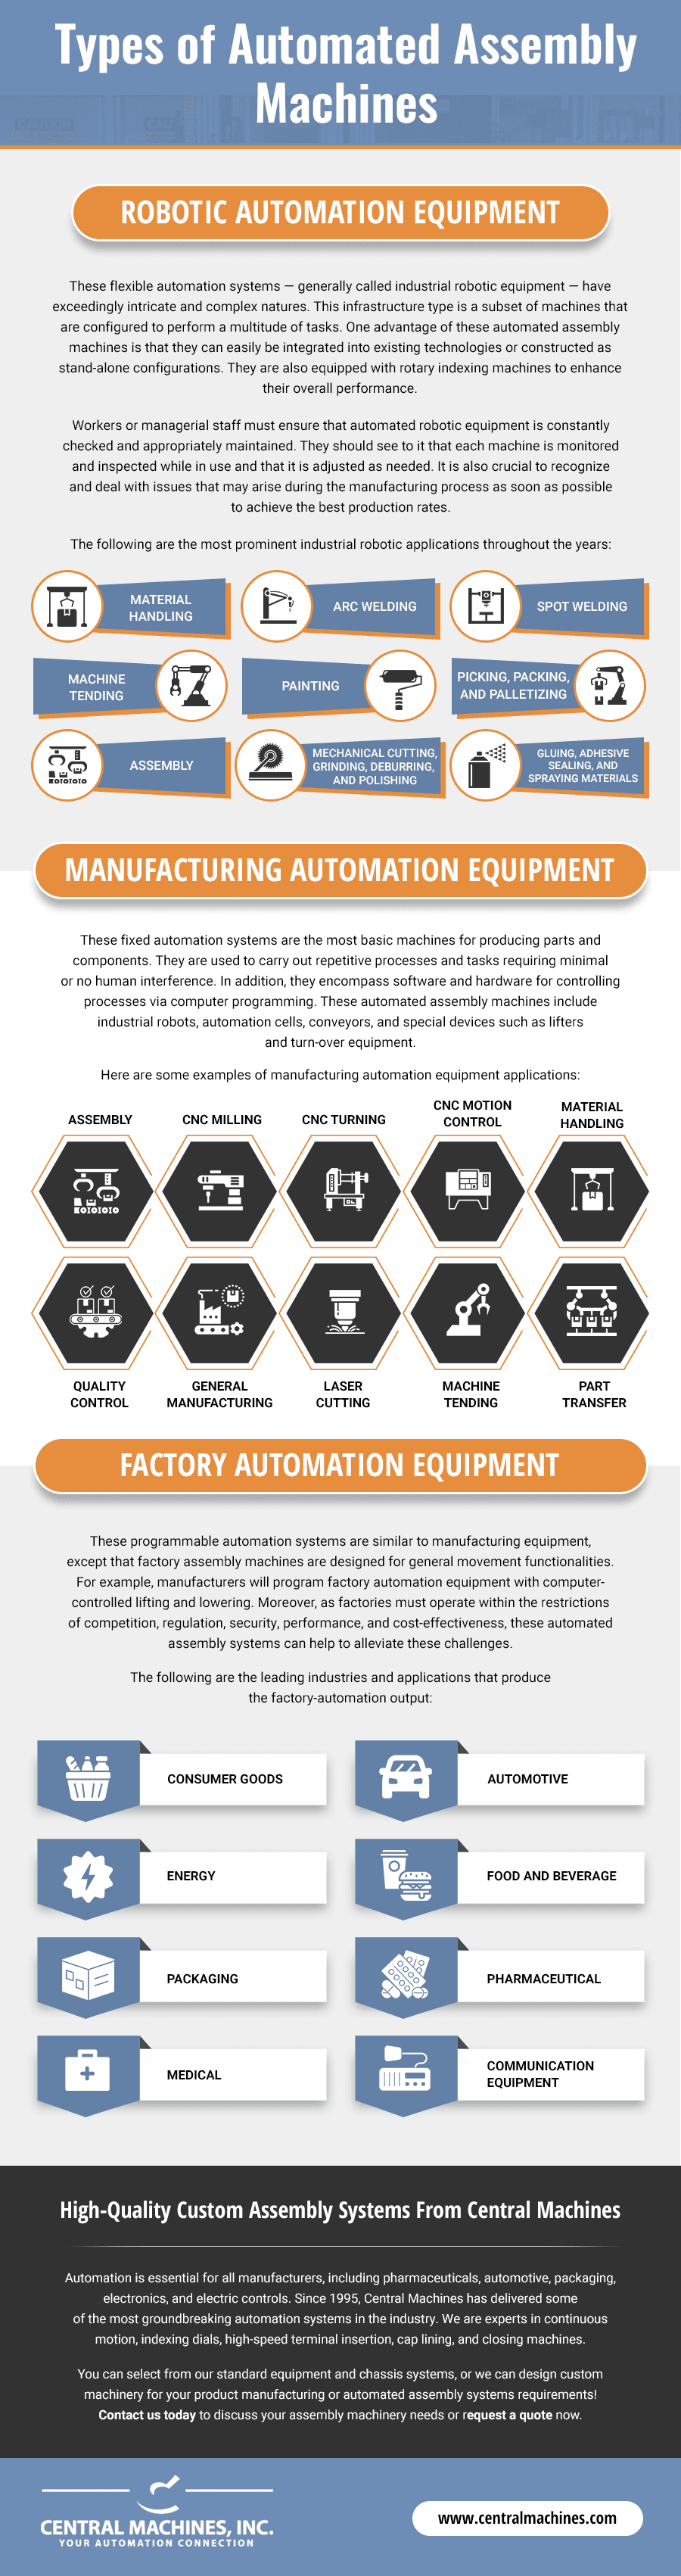 Types of Automated Assembly Machines